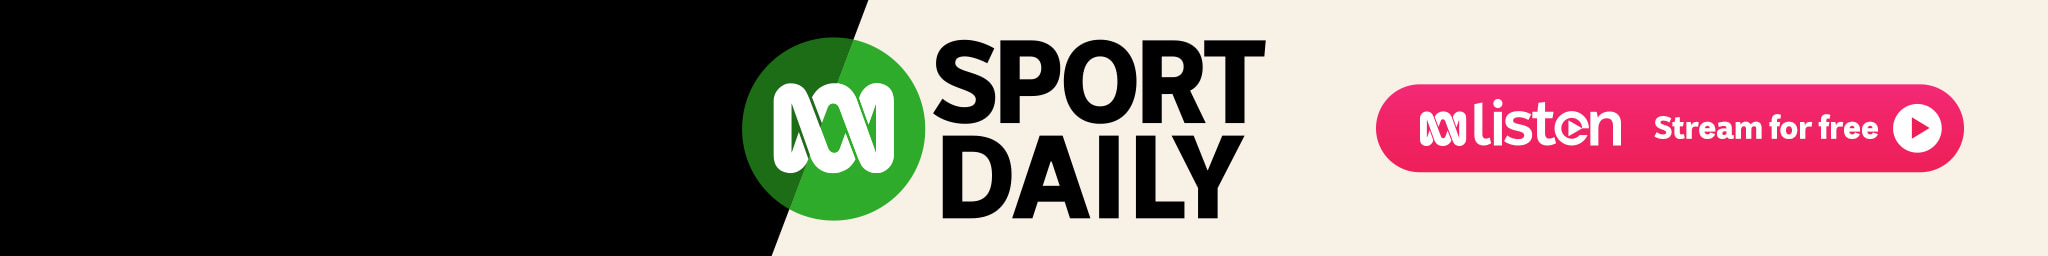 Sport daily podcast. Stream for free on ABC Listen